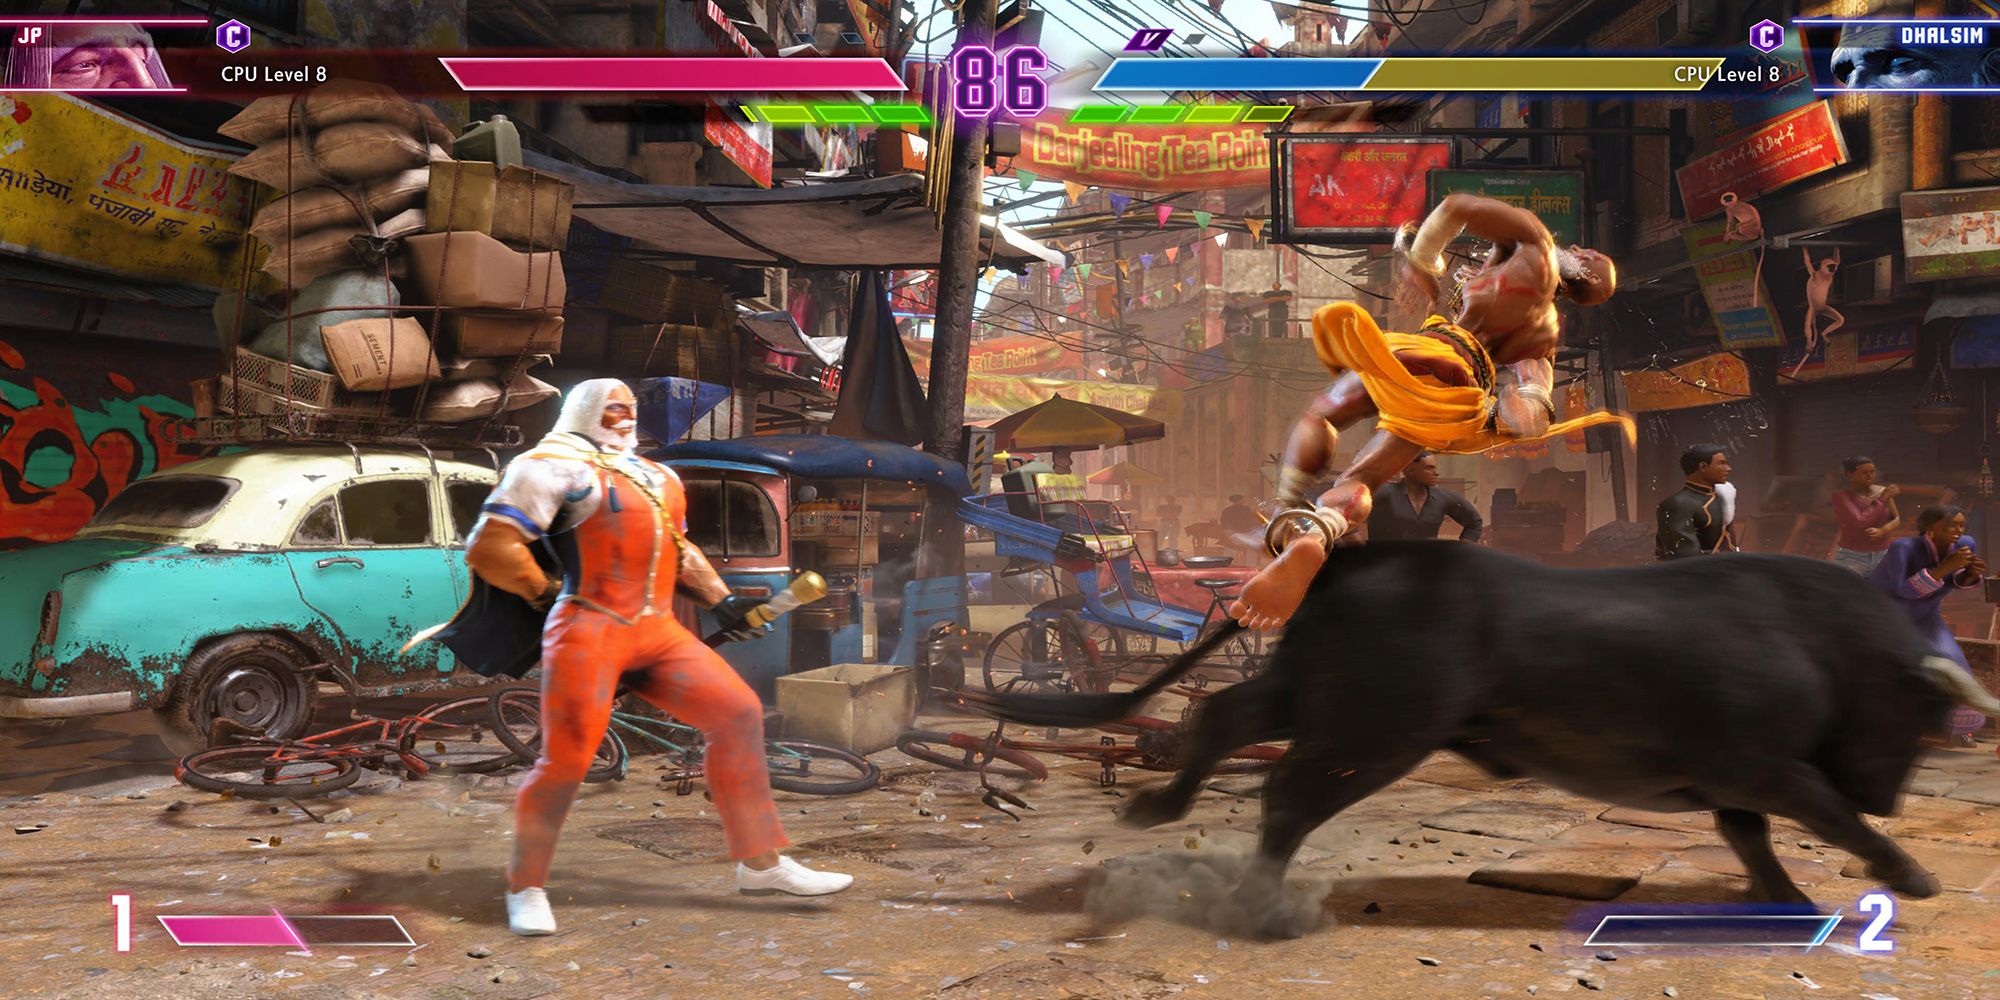 Dhalsim gets launched into the air by a bull, while JP stands unfazed, during an Extreme Battle at Old Town Market in Street Fighter 6.